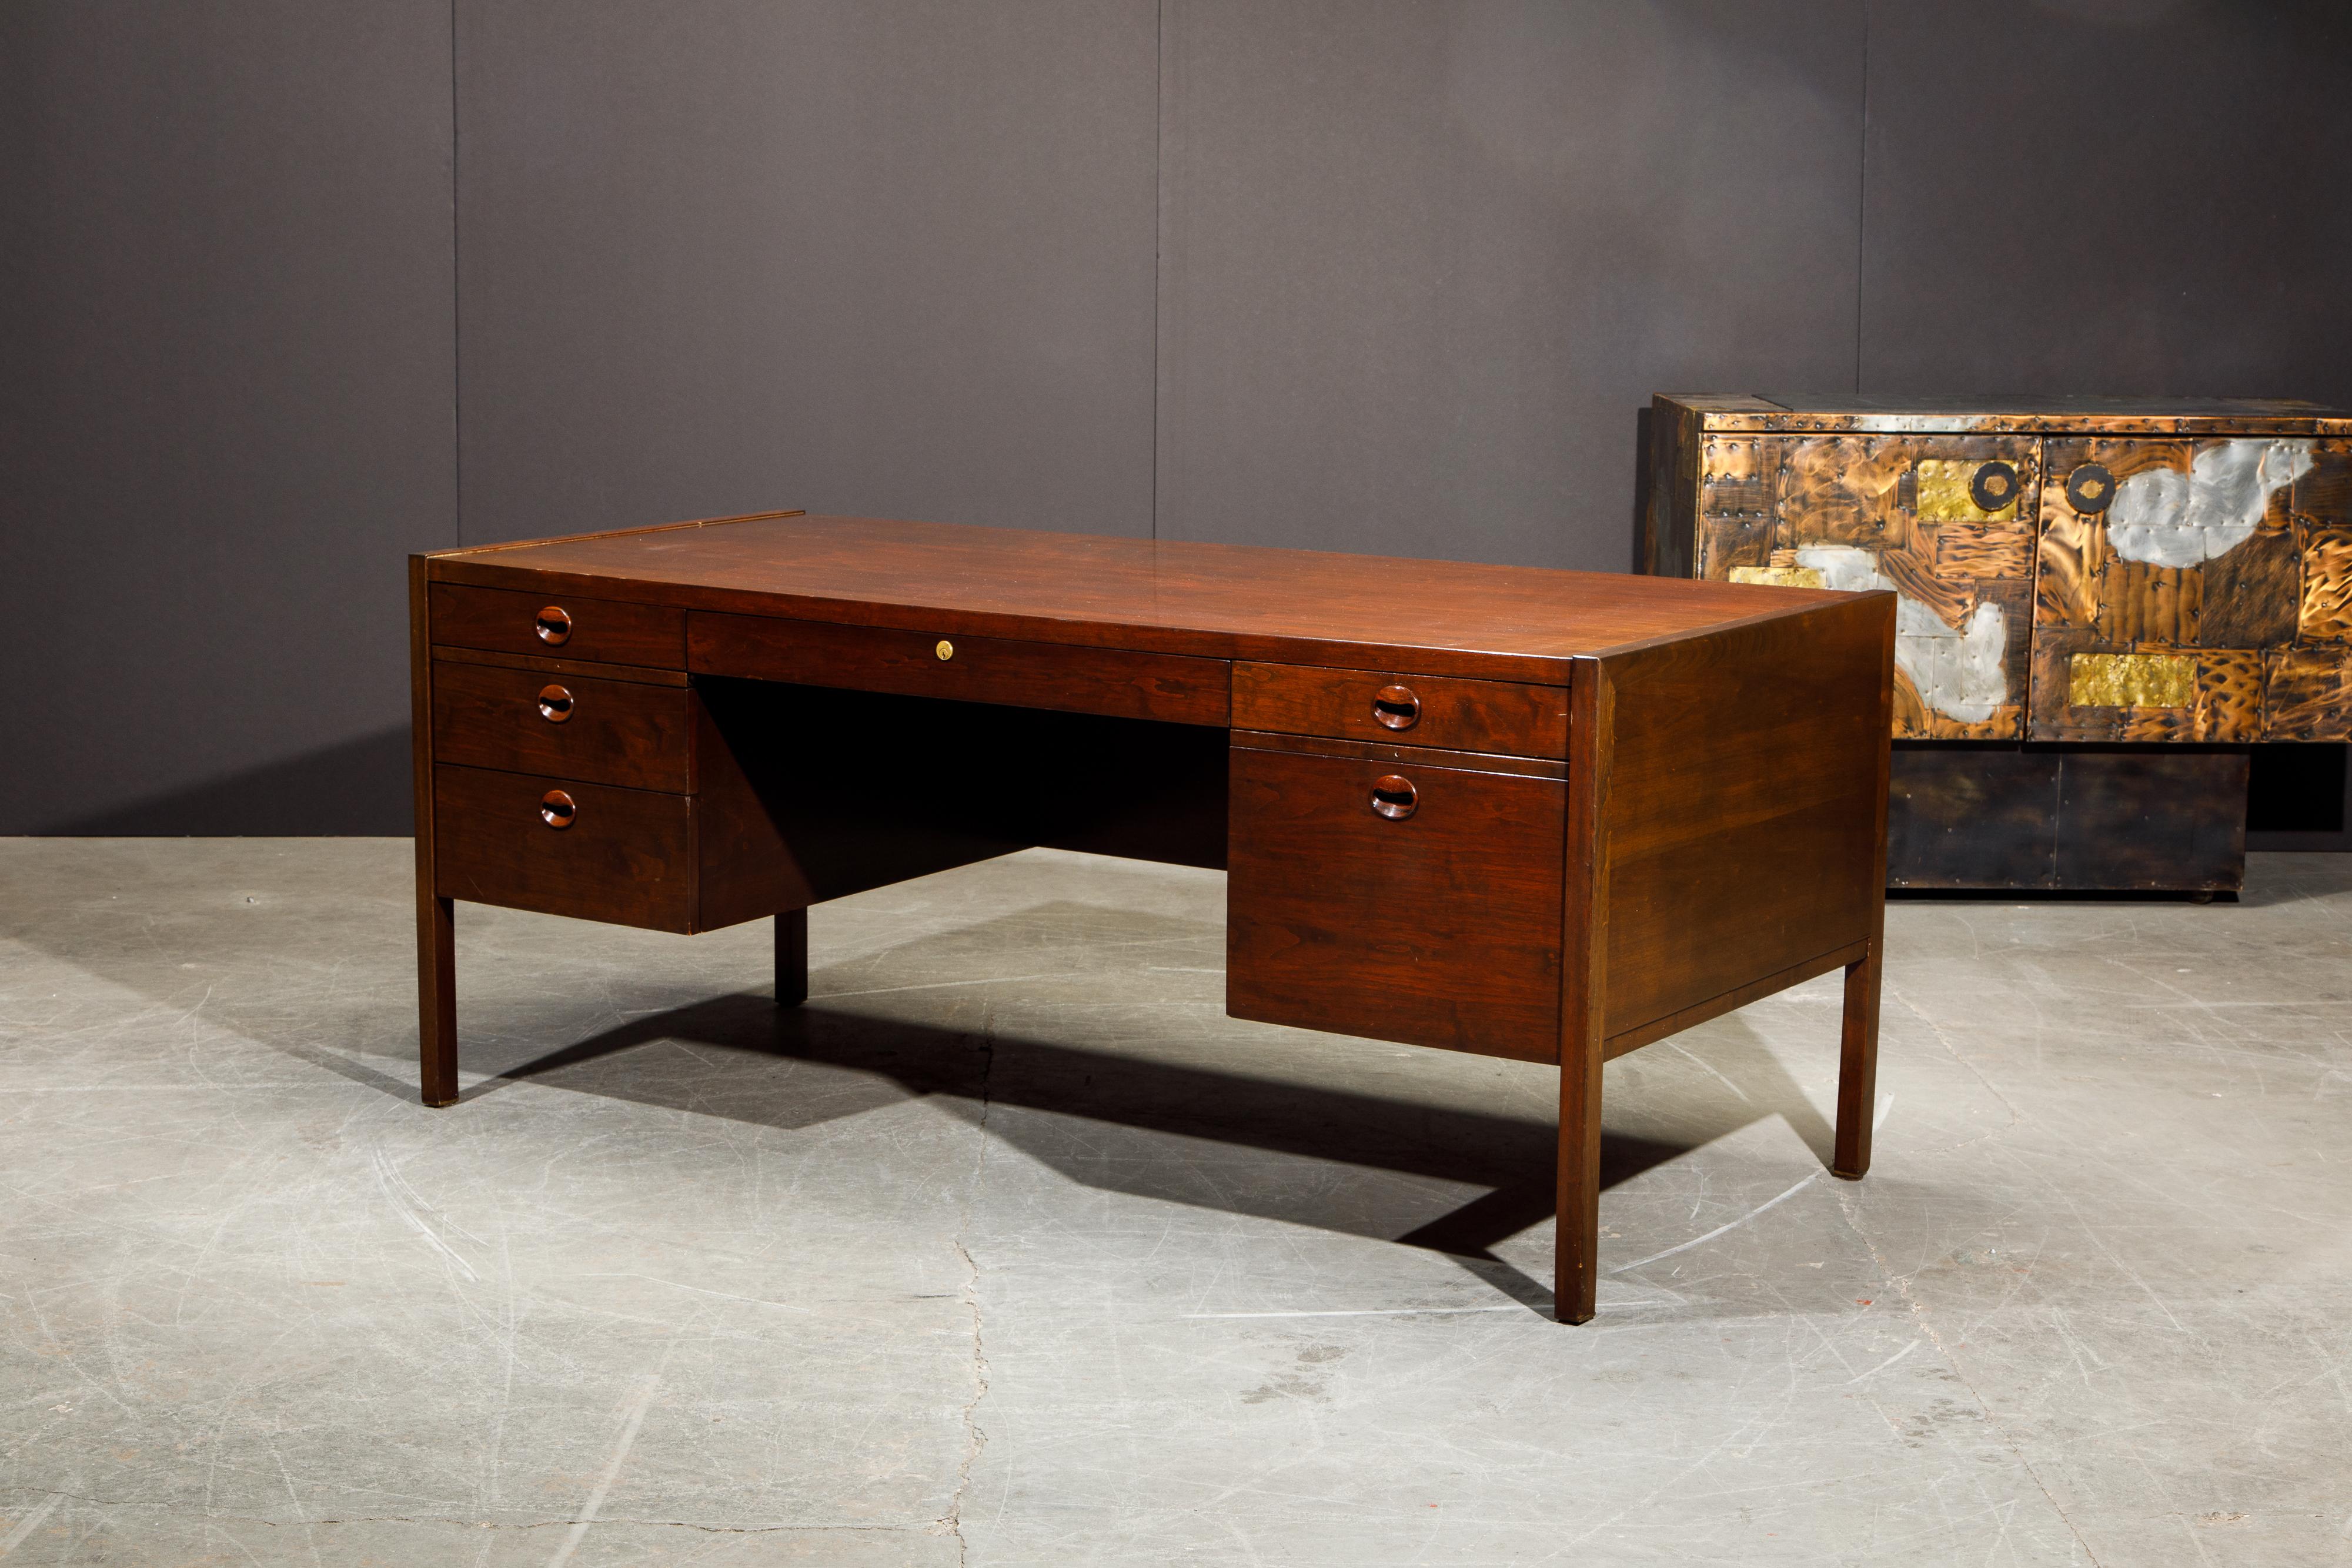 Mid-20th Century Rosewood and Mahogany Executive Desk by Edward Wormley for Dunbar, 1963, Signed